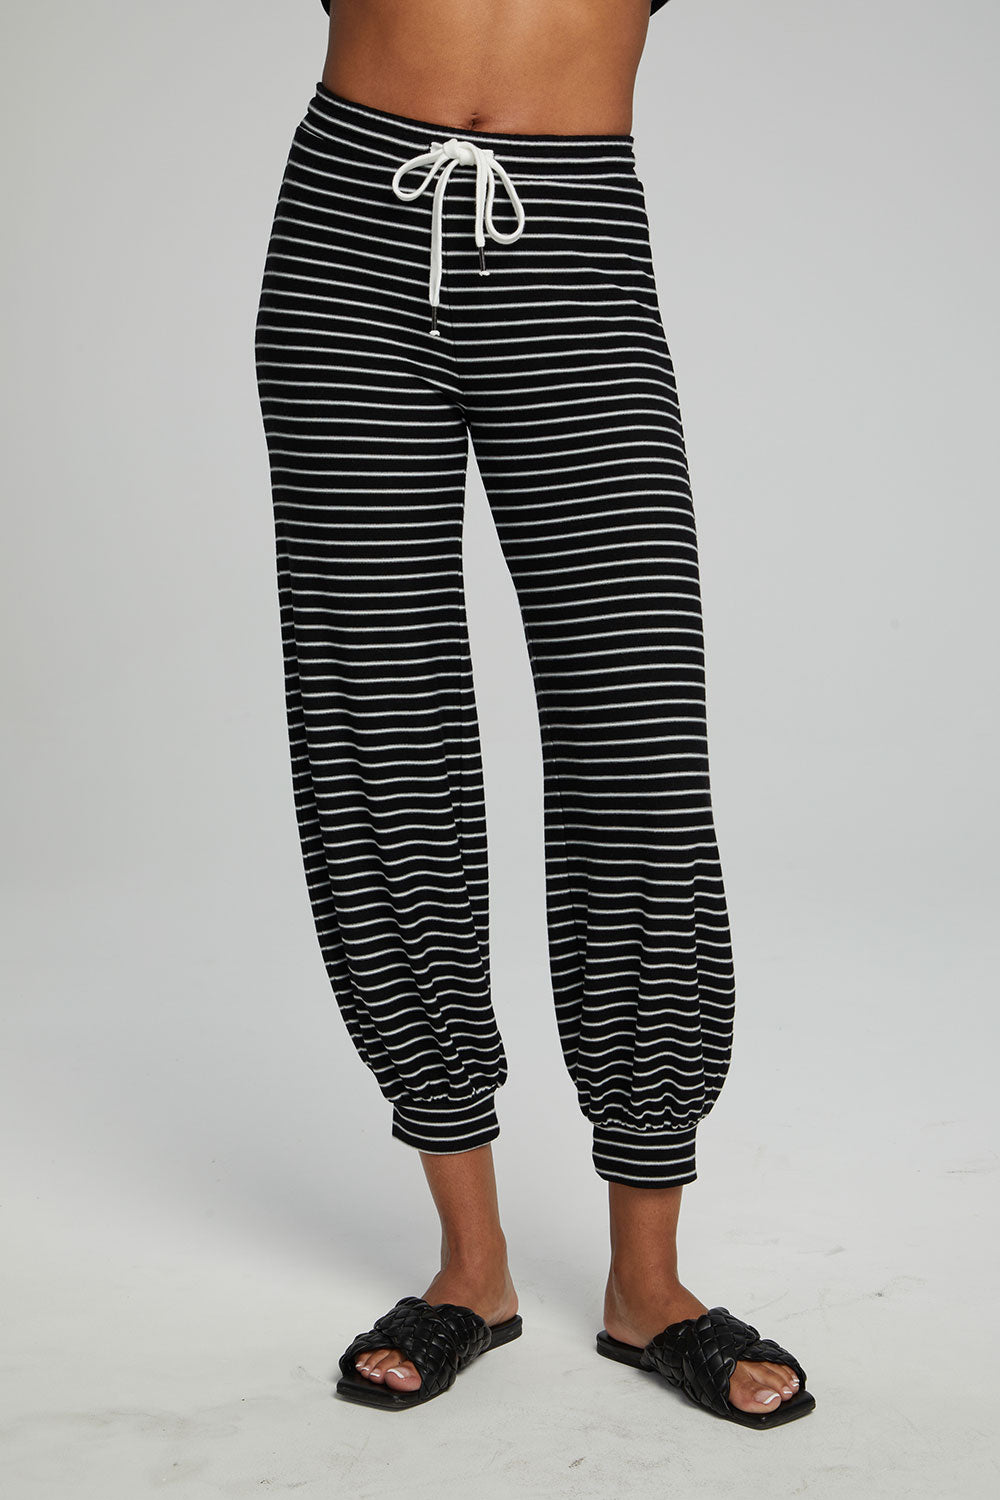 Weekend Joggers - Black and White Stripe